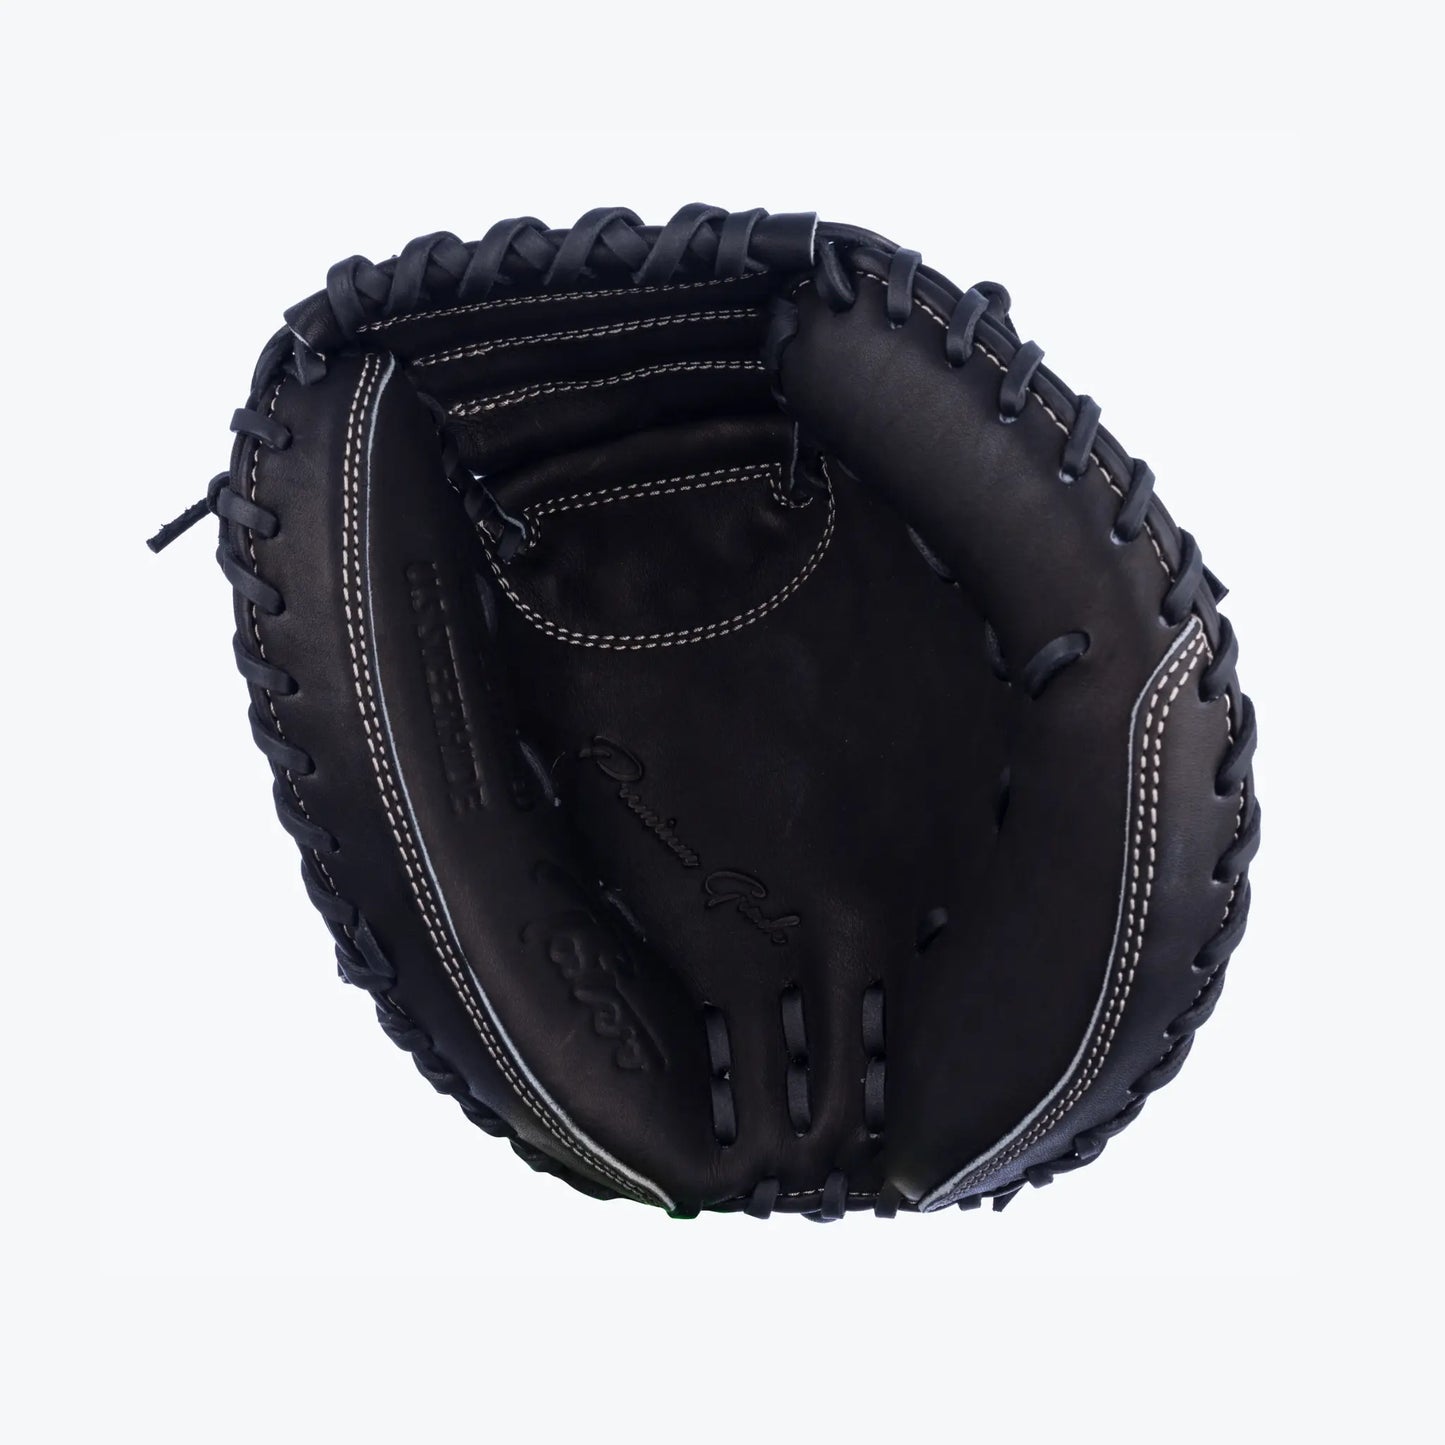 This image showcases the inside view of Tater Baseball's black catcher's mitt, a 28-inch mini trainer. The mitt's compact design is emphasized by the detailed white stitching and embossed logo, engineered for catchers to practice and master their craft with a focus on control and quick transfer.